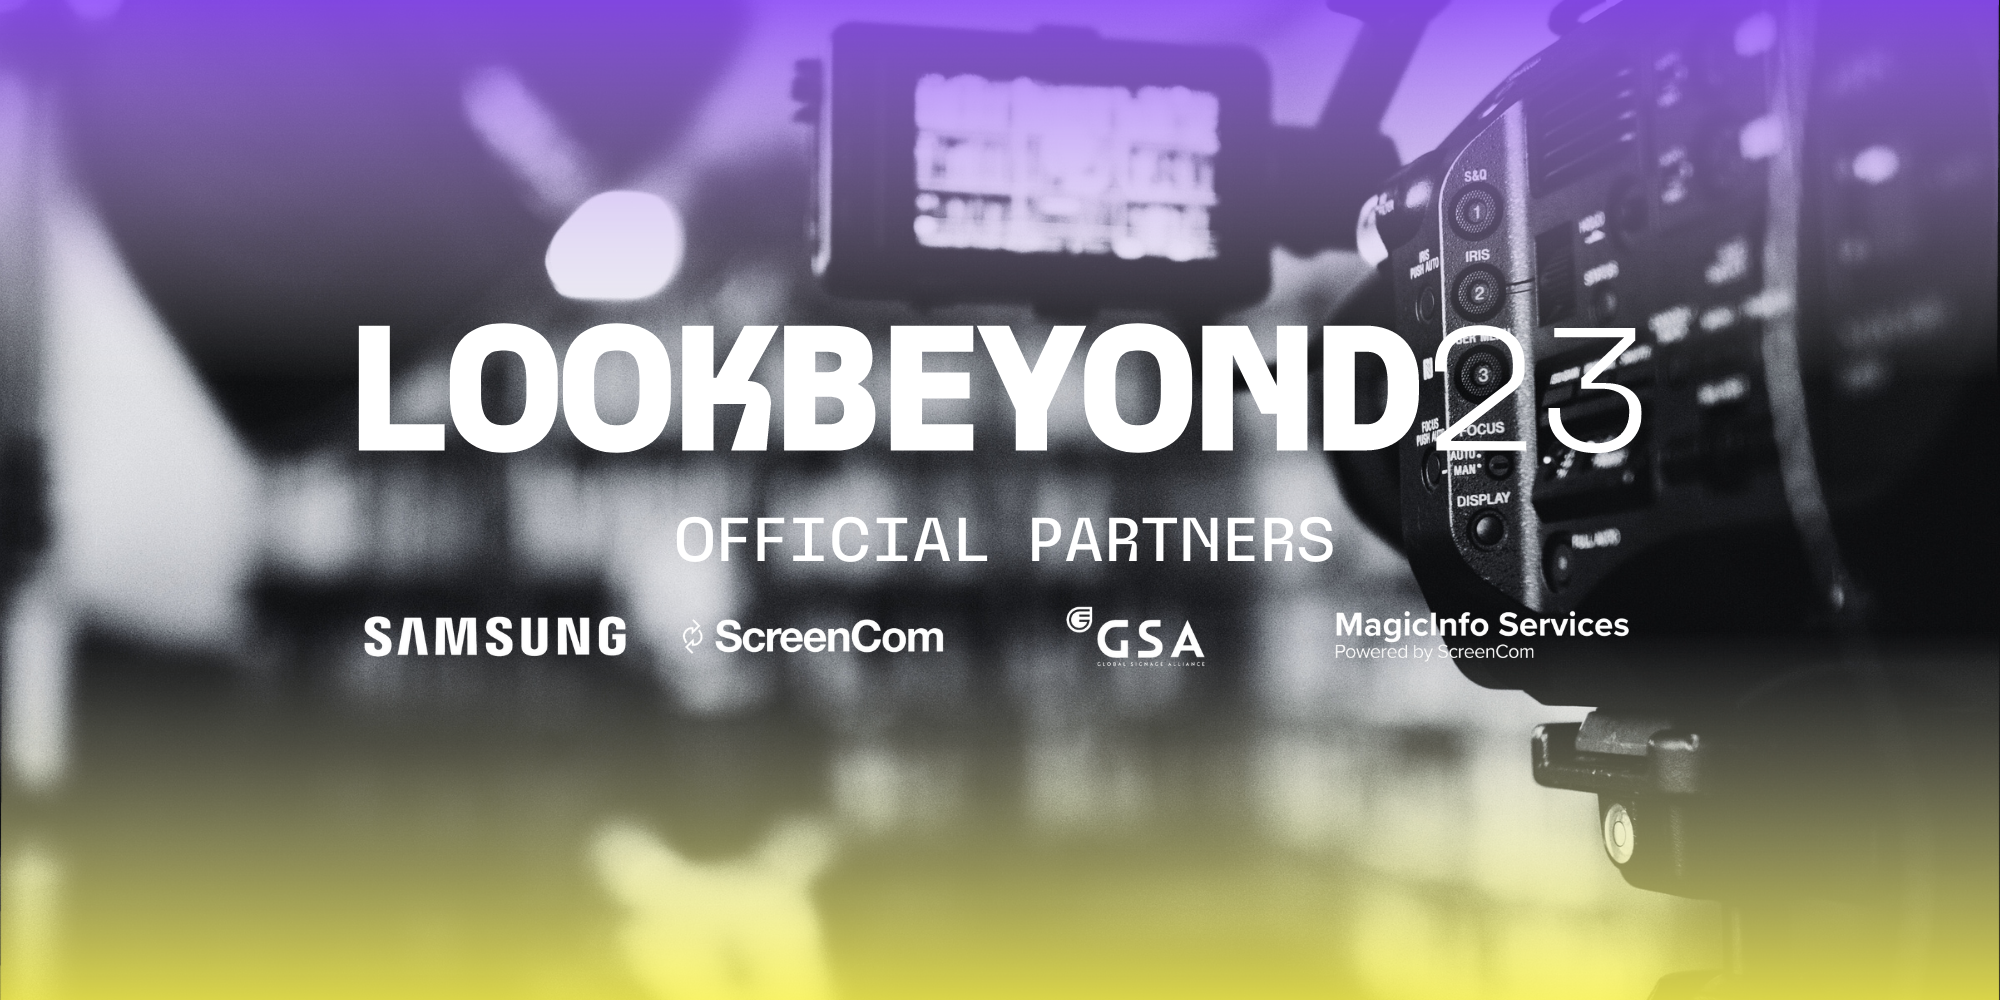 Official LOOBEYOND23 Partners